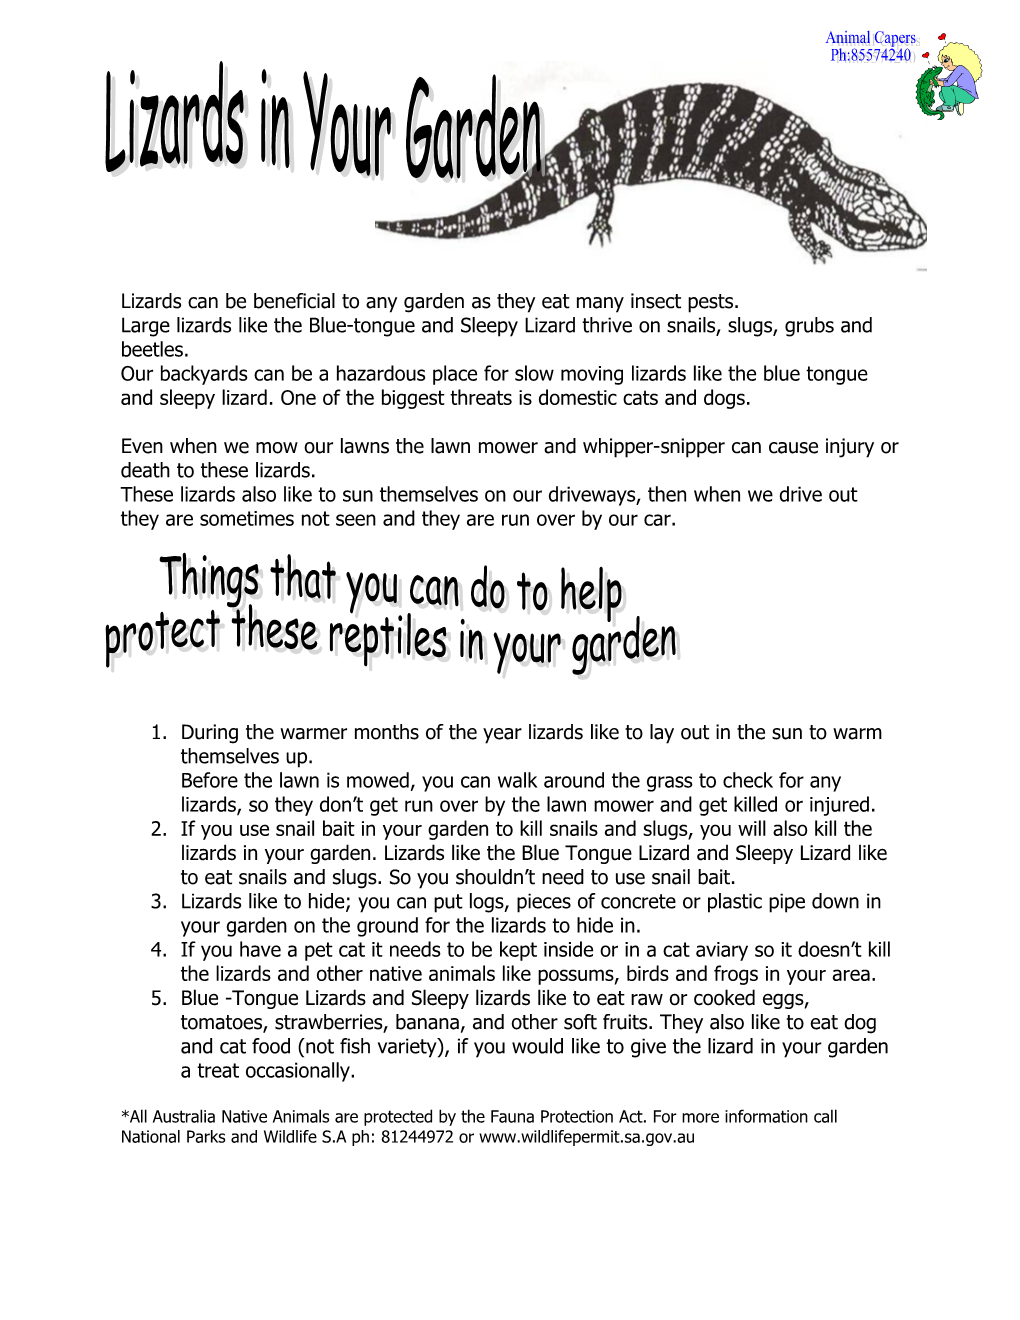 Lizards Can Be Beneficial to Any Garden As They Eat Many Insect Pests